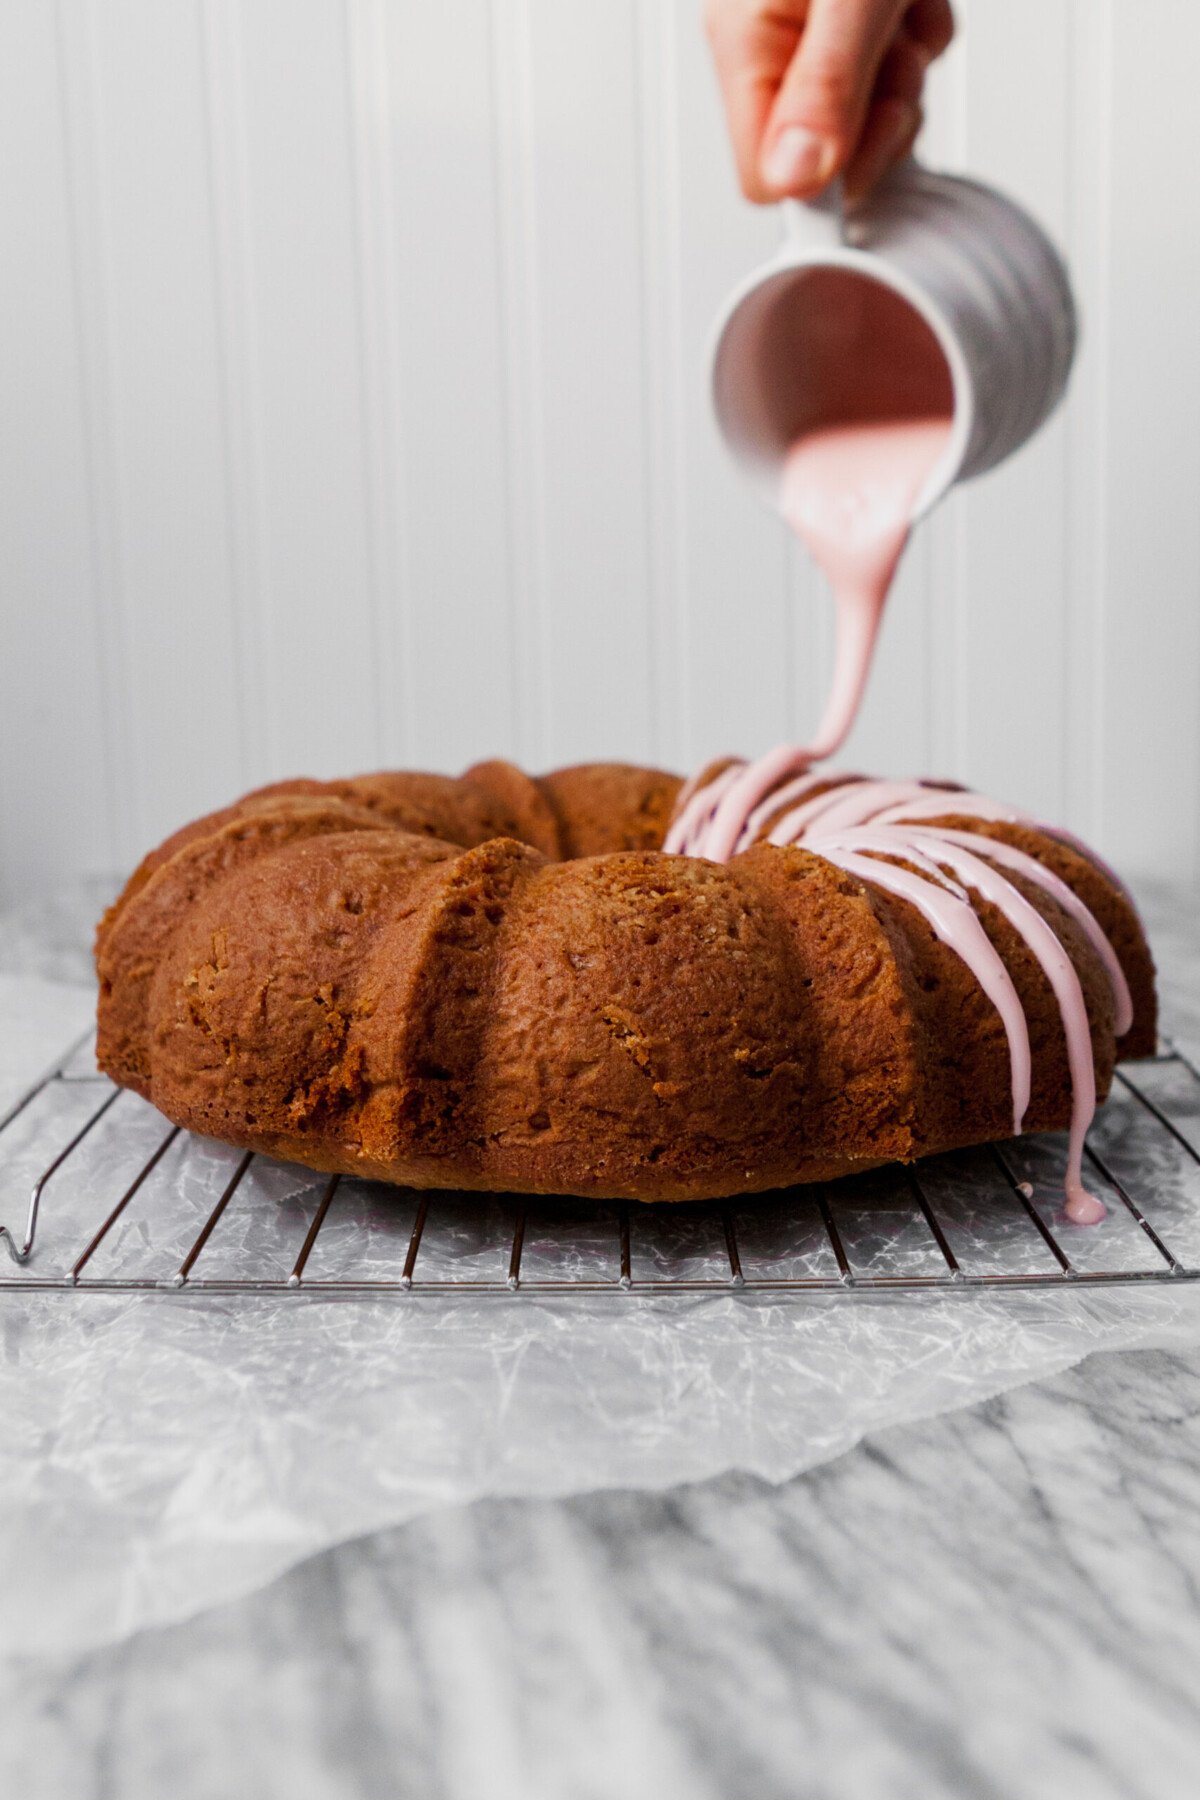 Tender bundt cake flavored with fresh grapefruit and Campari. This cake is naturally sweetened with honey, easy to whip, and elegant enough for a fancy party. | from Lauren Grant of Zestful Kitchen